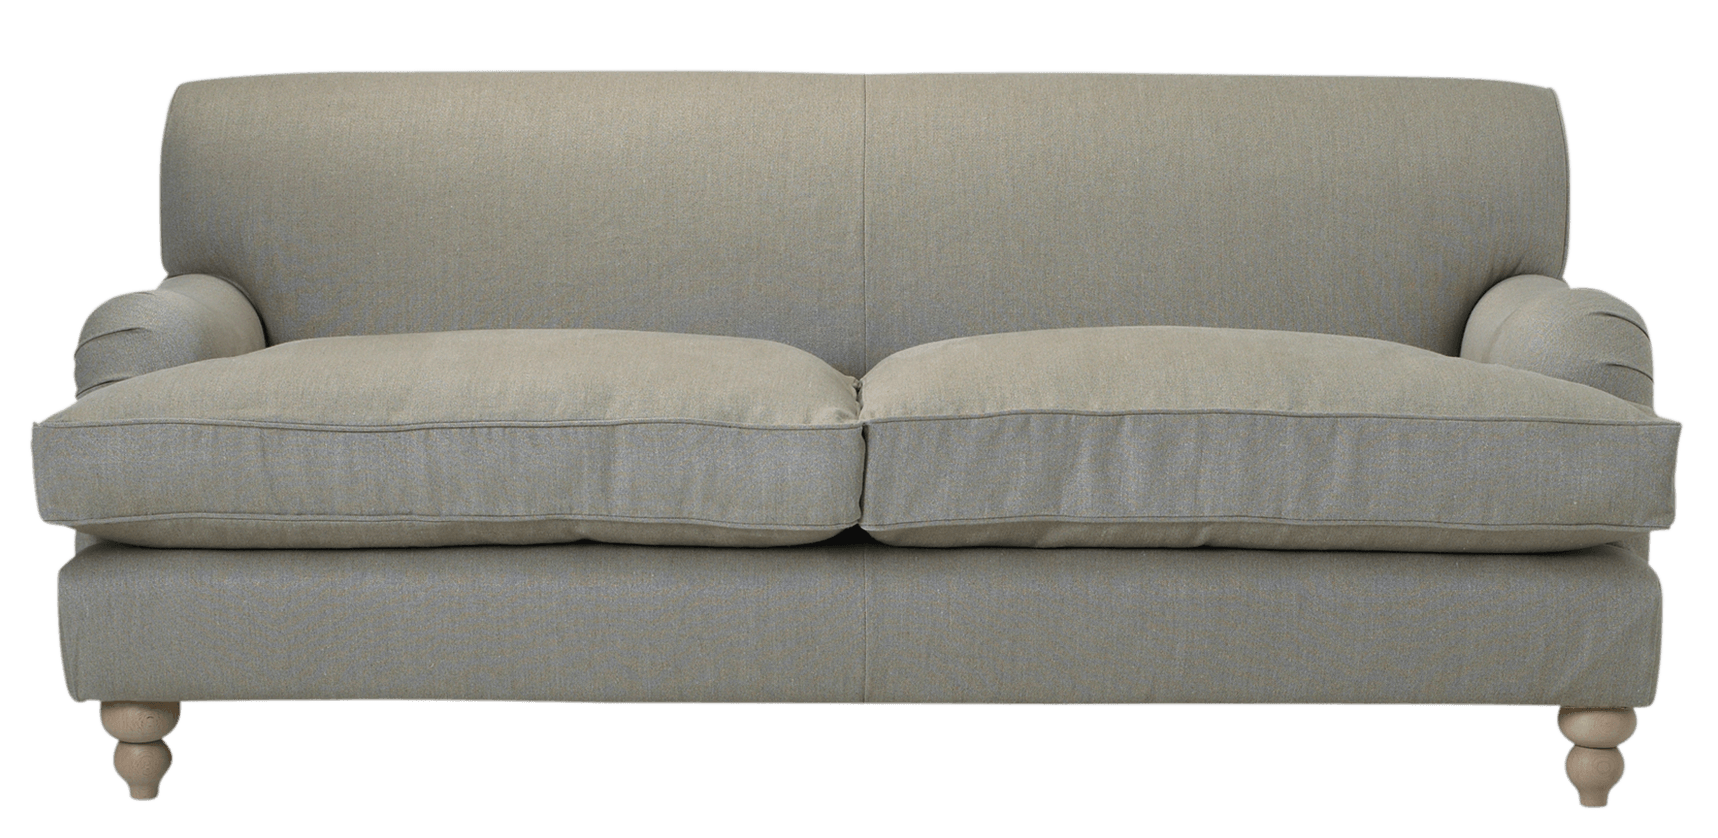 couch clipart transparent background